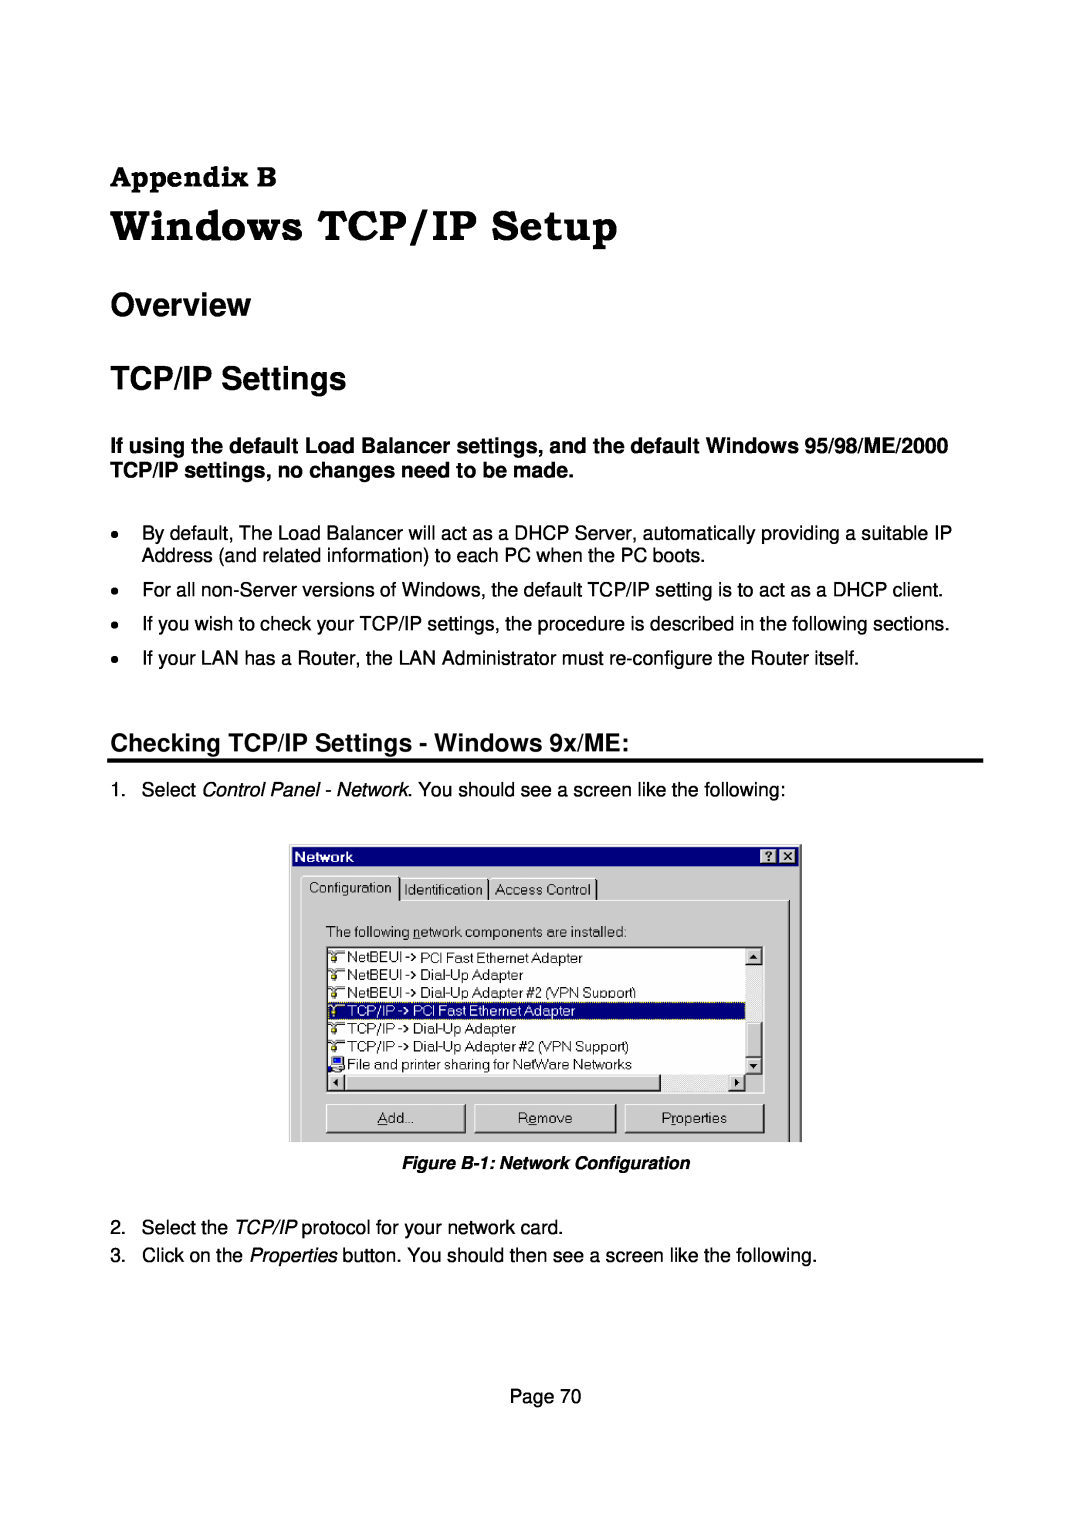 Edimax Technology Edimax user guide Router manual Windows TCP/IP Setup, Overview TCP/IP Settings, Appendix B 